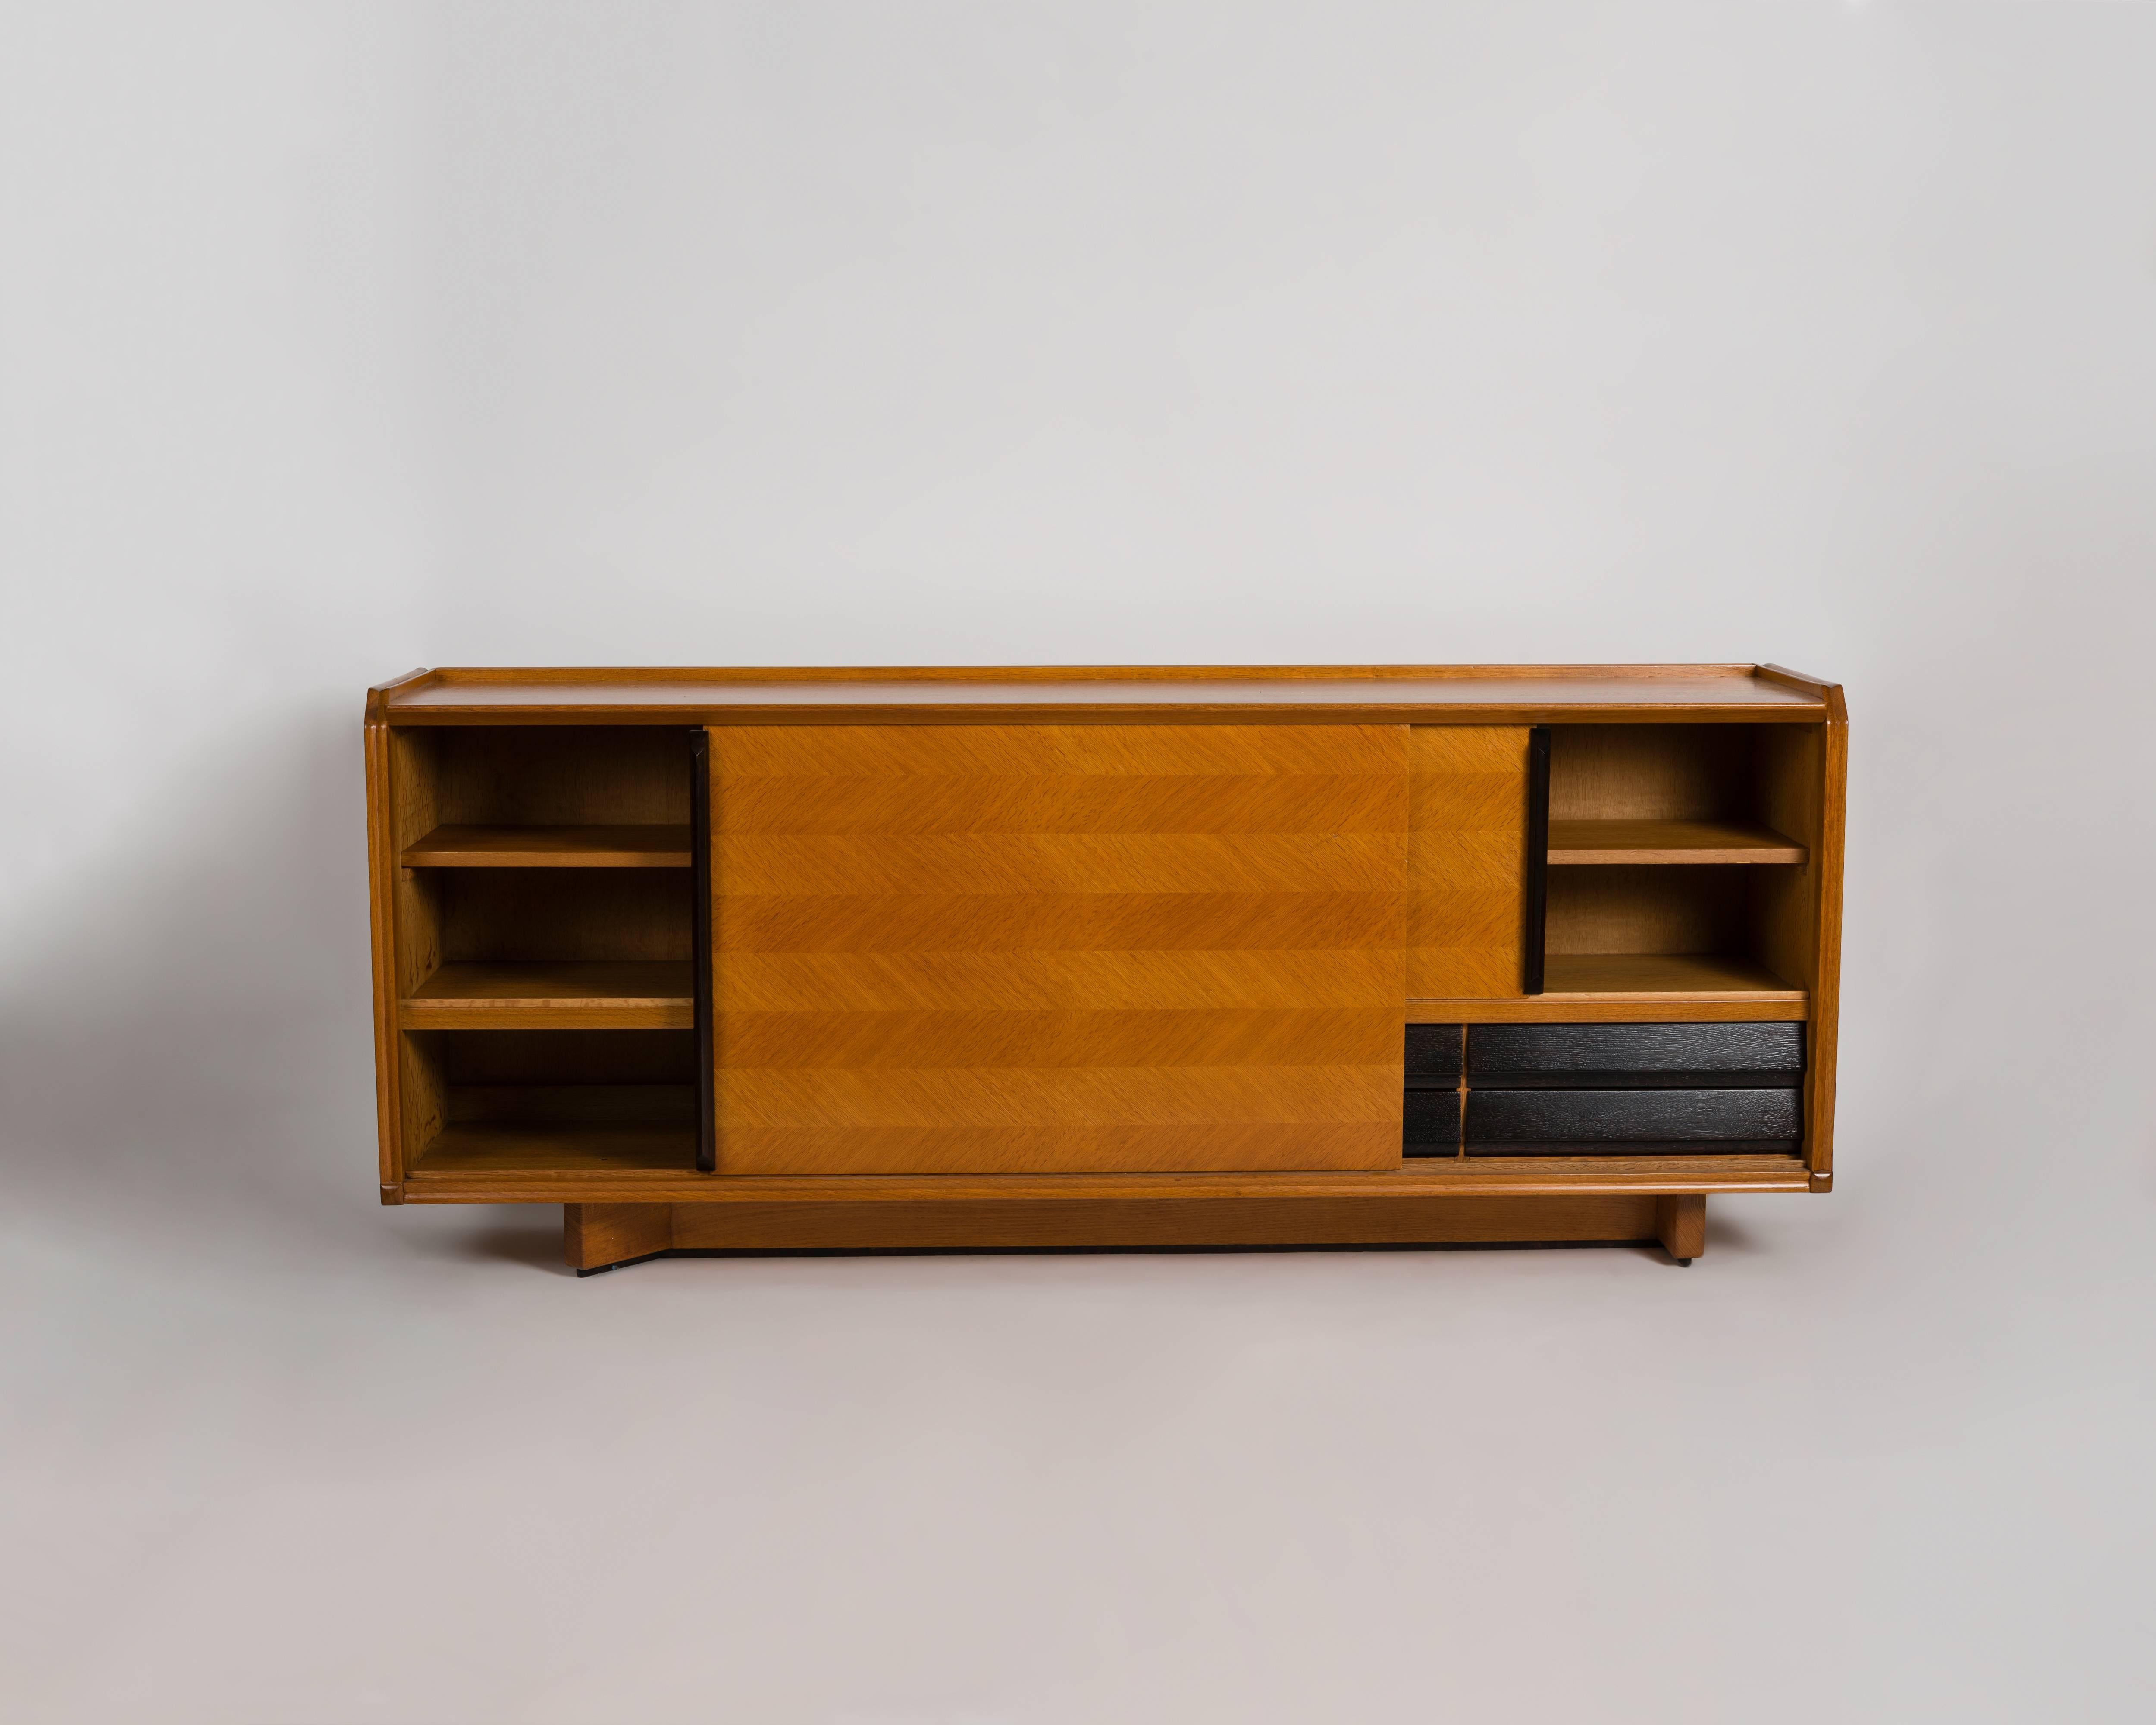 This midcentury buffet in a light, veneered oak has sliding doors and drawers, and was made by the celebrated French designer Robert Guillerme, as part of a line of midcentury design he produced for the company, Votre Maison.